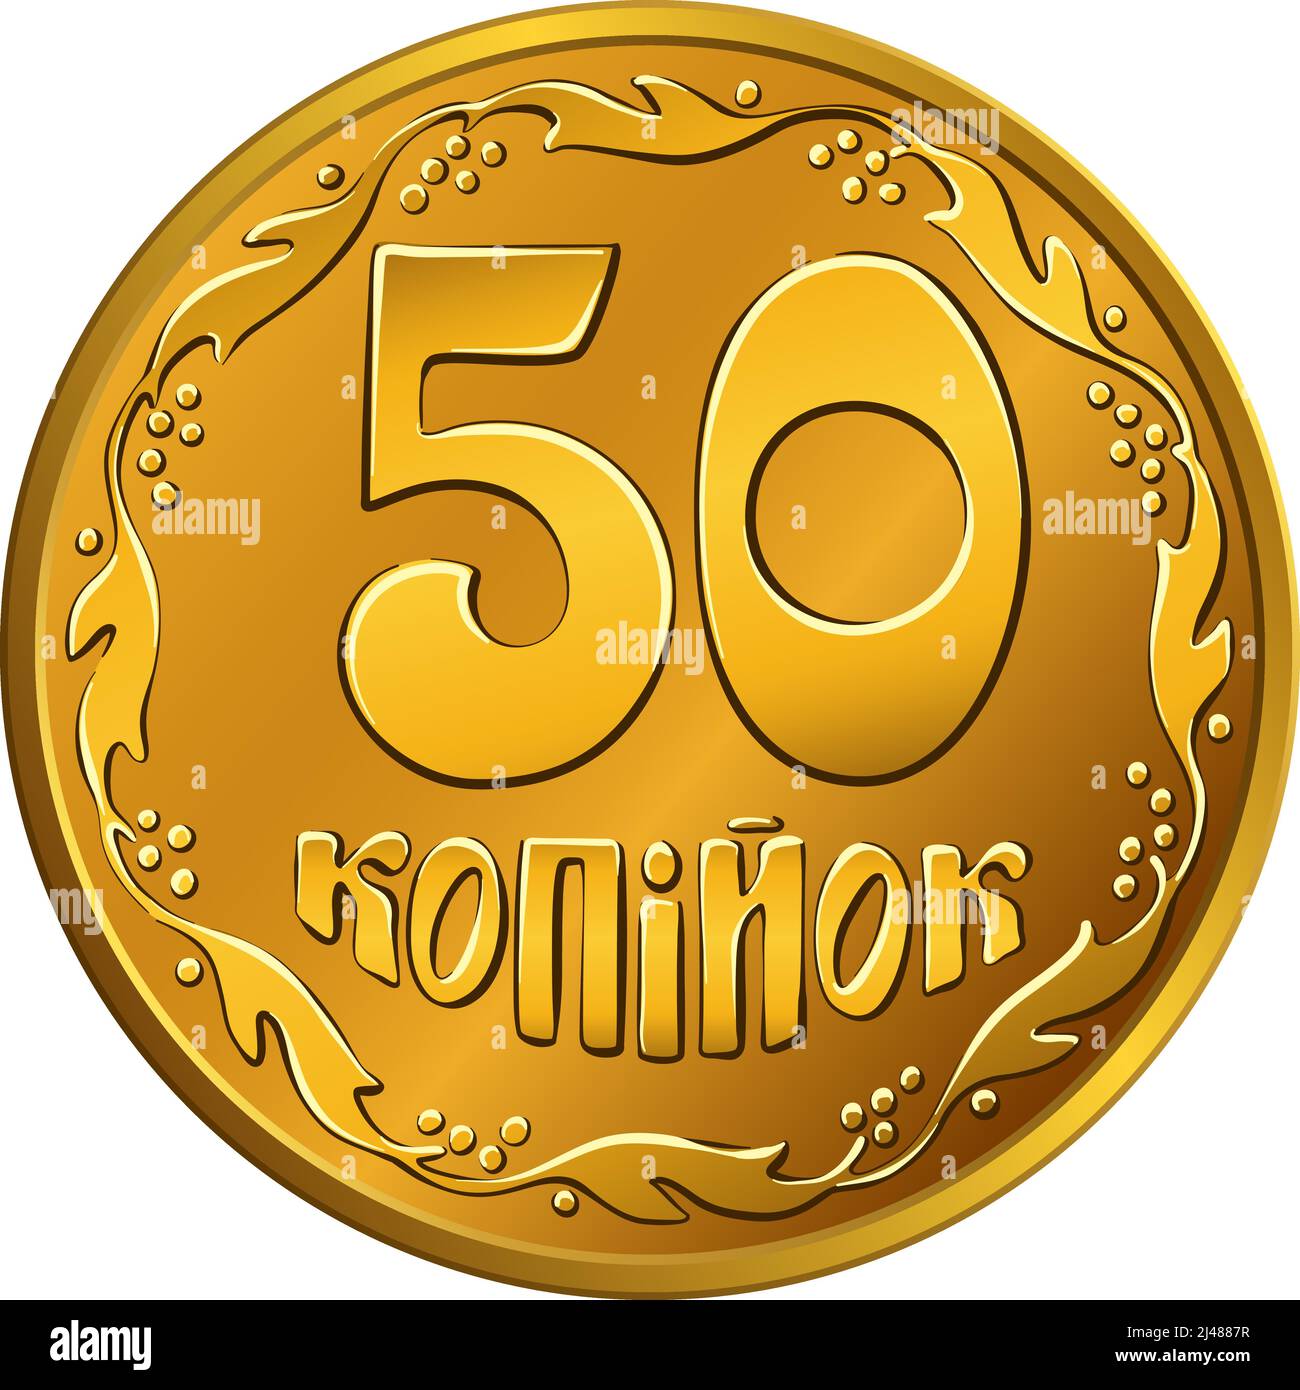 Ukrainian money gold coin 50 kopiyok, obverse with value and ornament of stylized branches Stock Vector